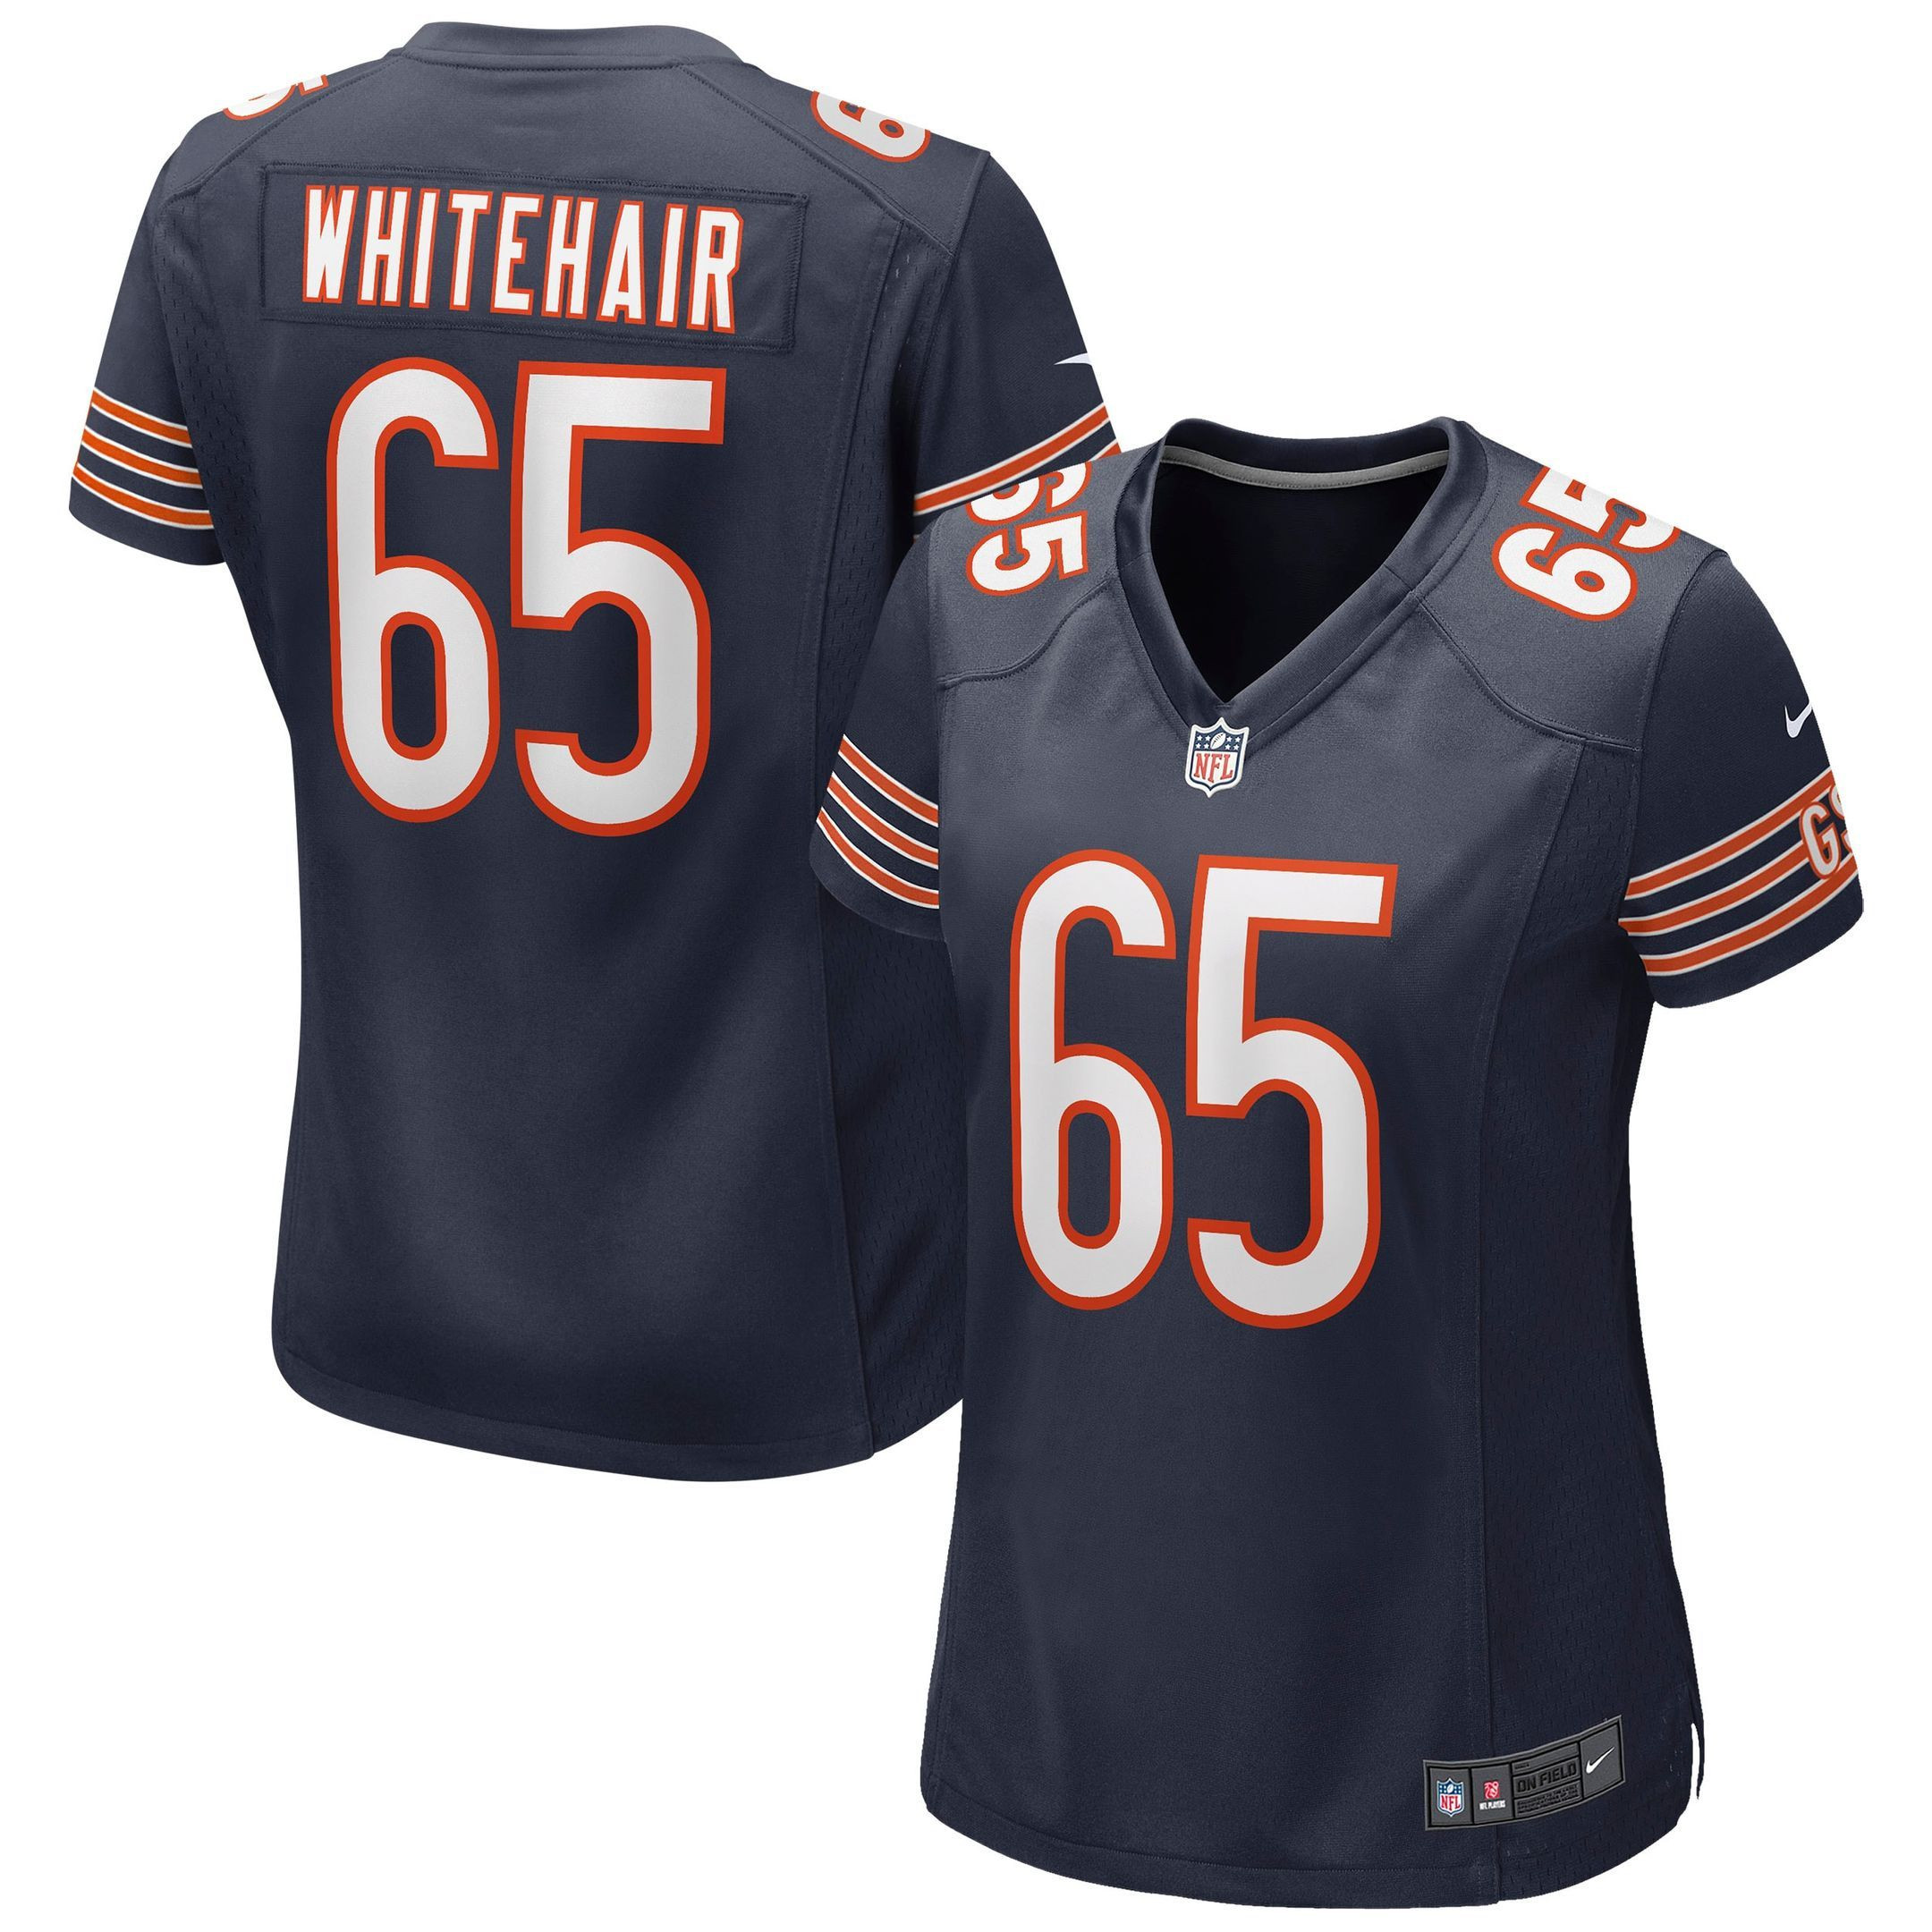 Womens Chicago Bears Cody Whitehair Navy Game Jersey Gift for Chicago Bears fans